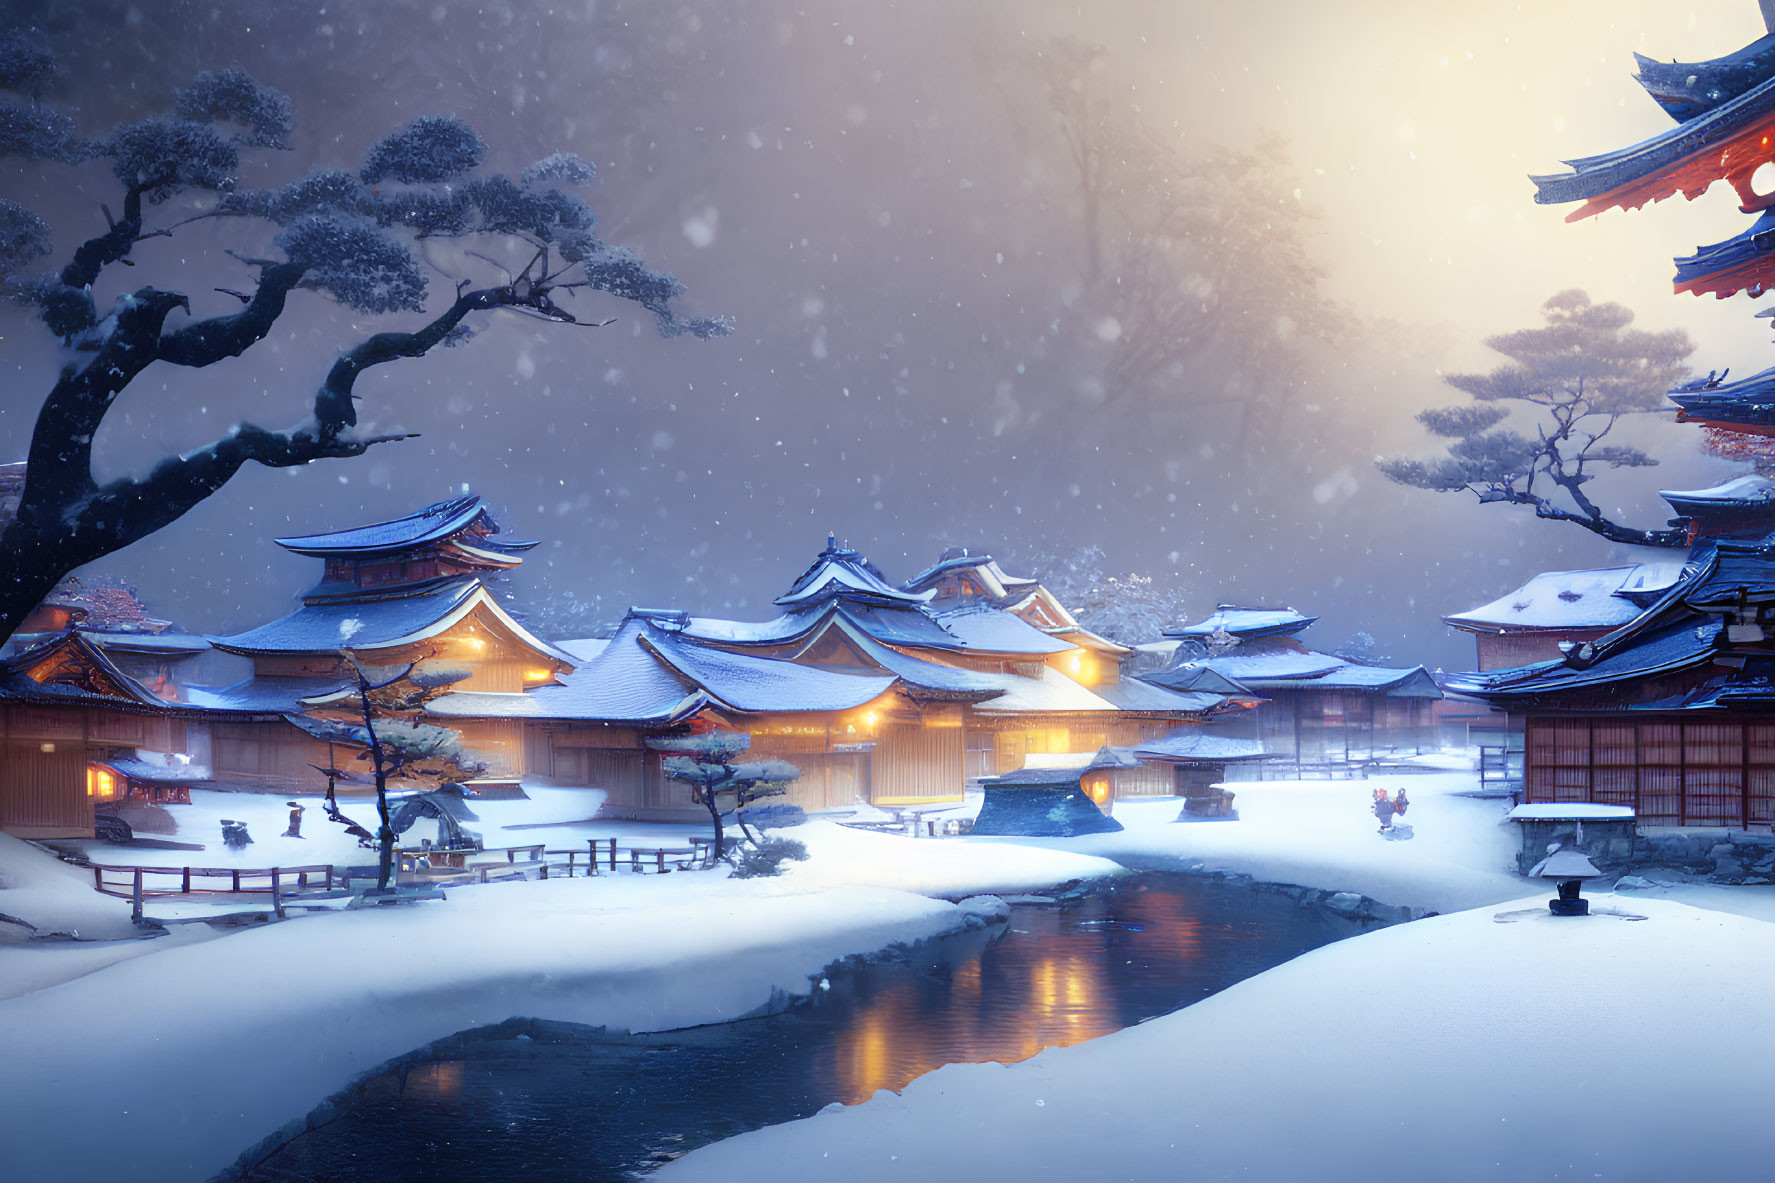 Snowy Japanese village with illuminated buildings, bridge, frozen river, and tree.